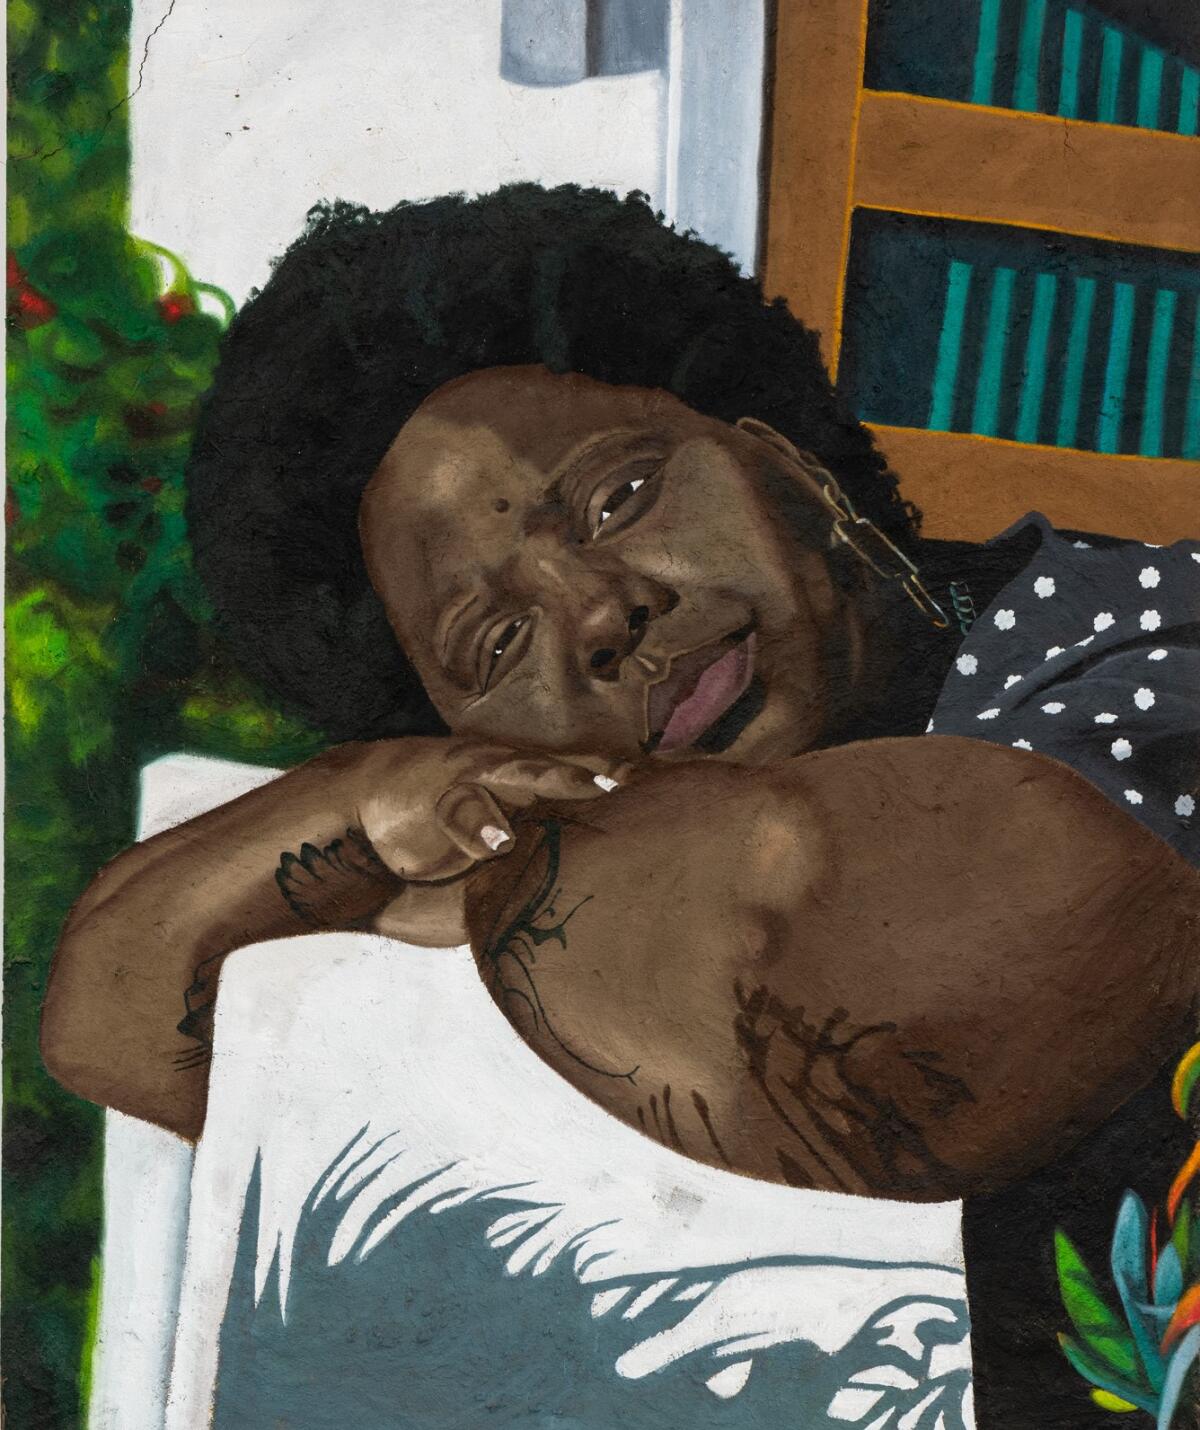 rafa esparza, "big chillin with Patrisse," a portrait of a Black woman leaning on a white shape.